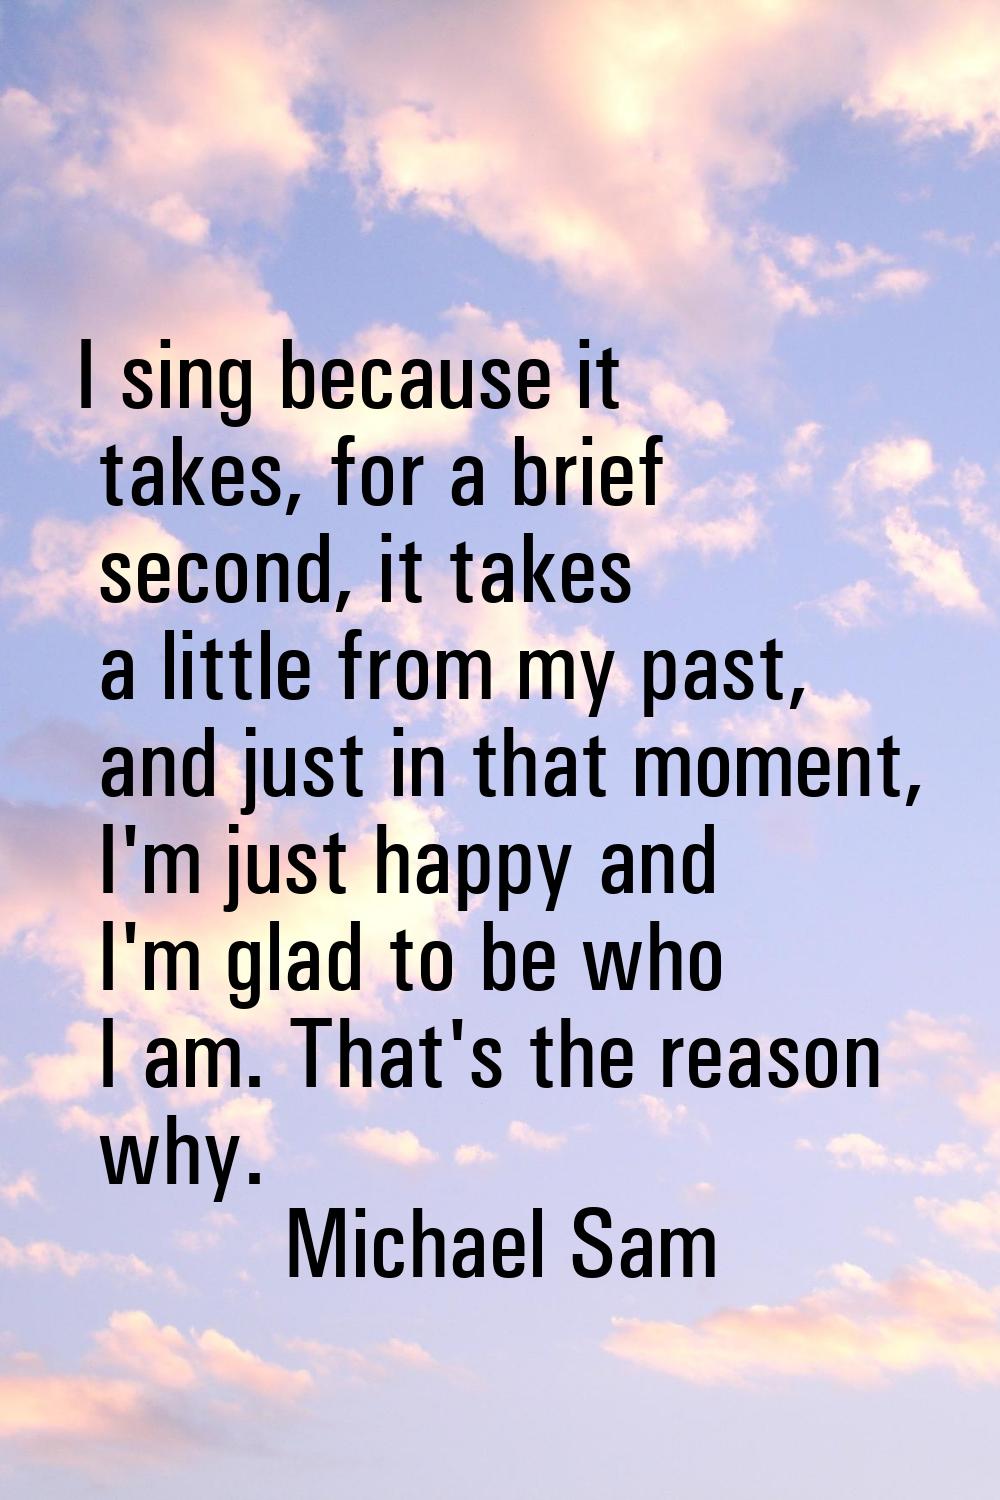 I sing because it takes, for a brief second, it takes a little from my past, and just in that momen